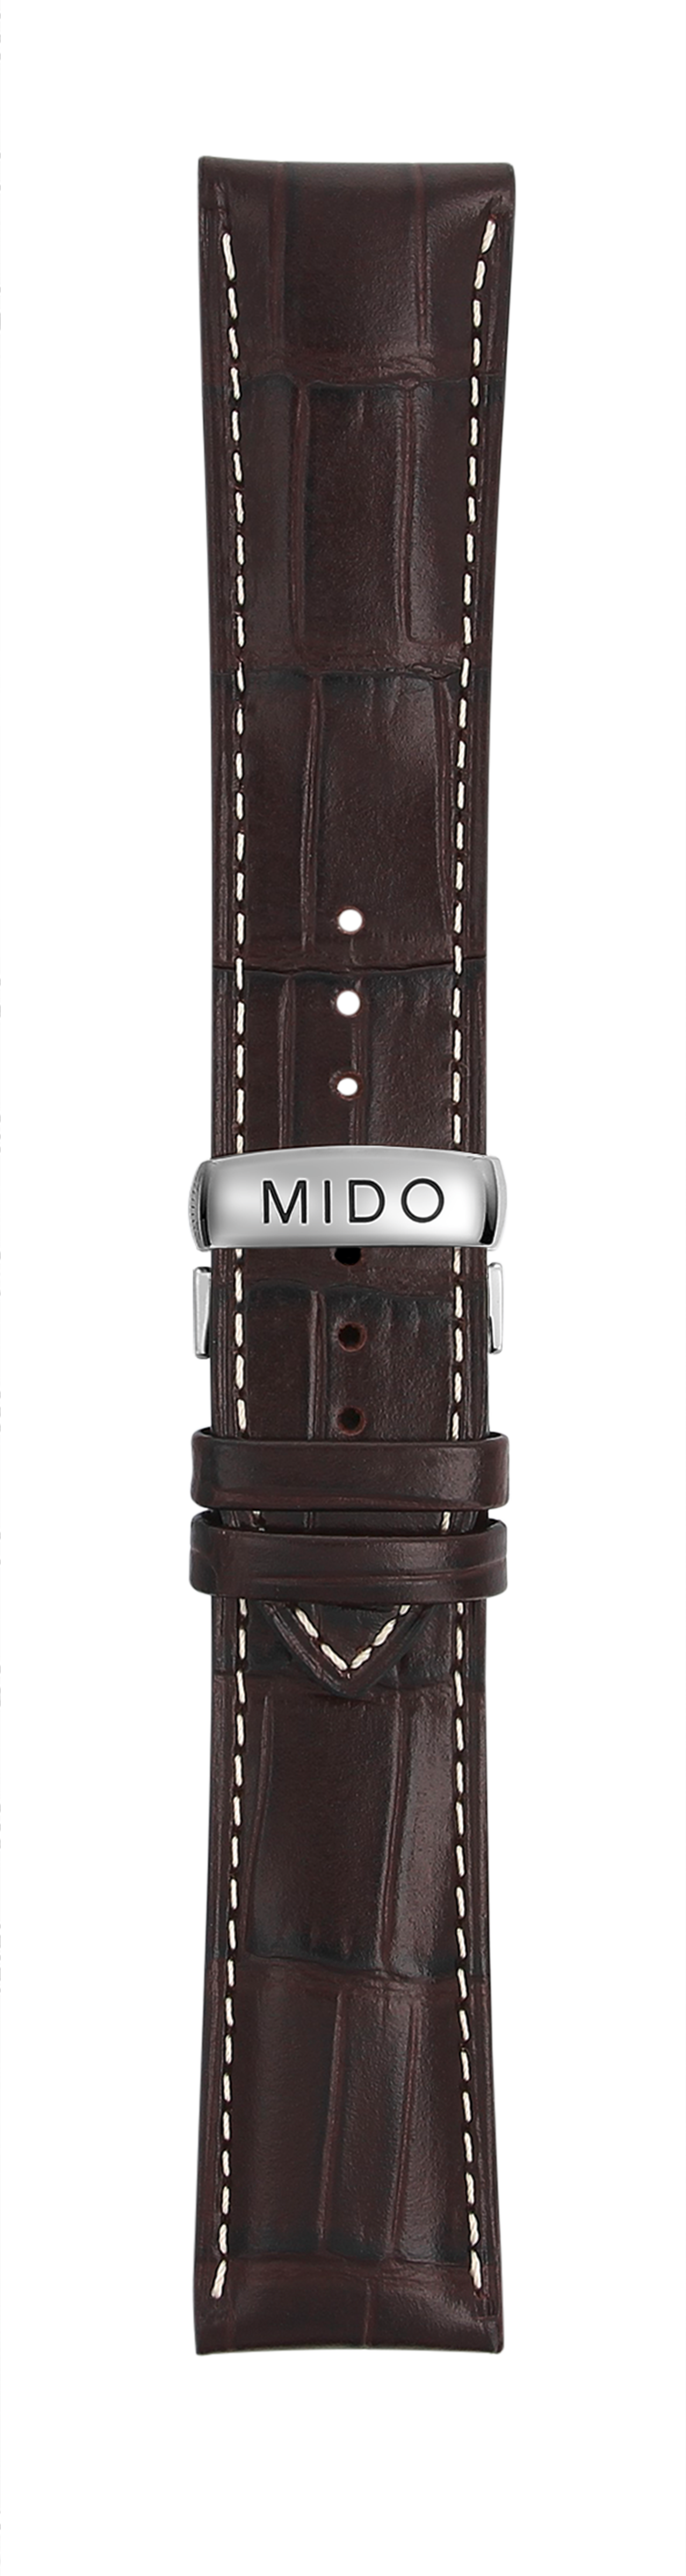 Mido Multifort brown cowhide leather strap